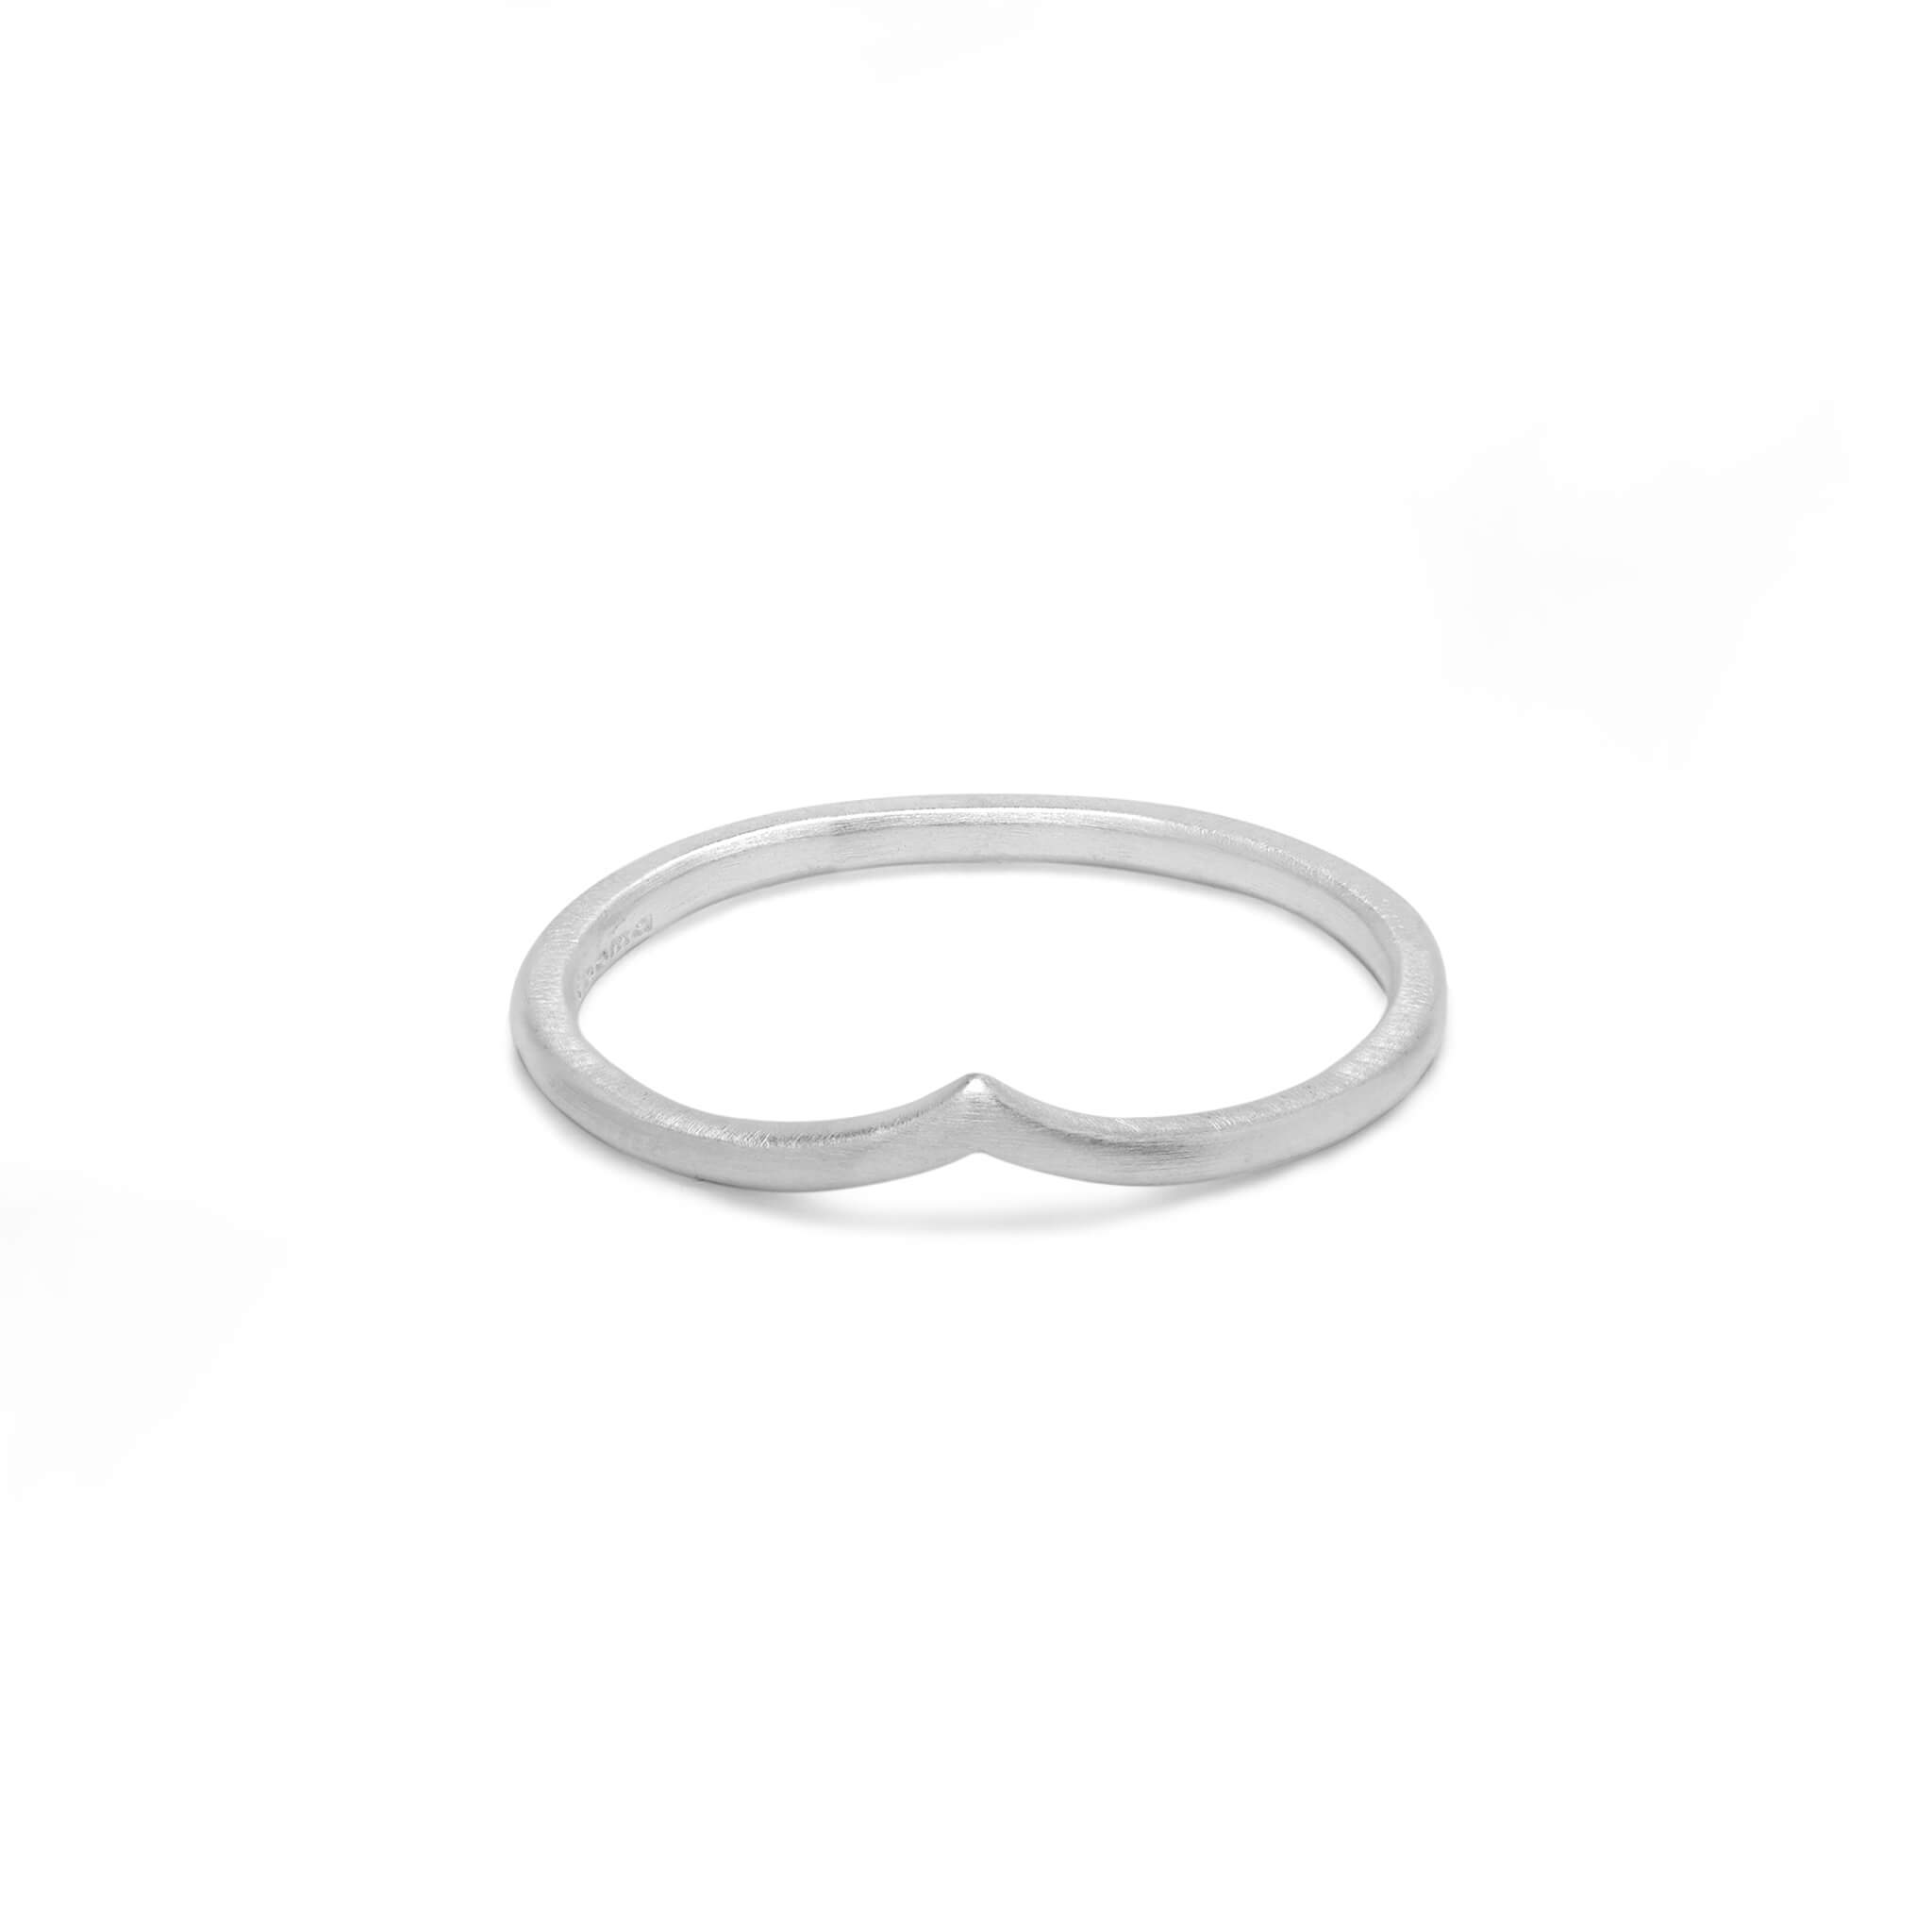 Boma Jewelry Rings 5 Belle Chevron Matte Ring